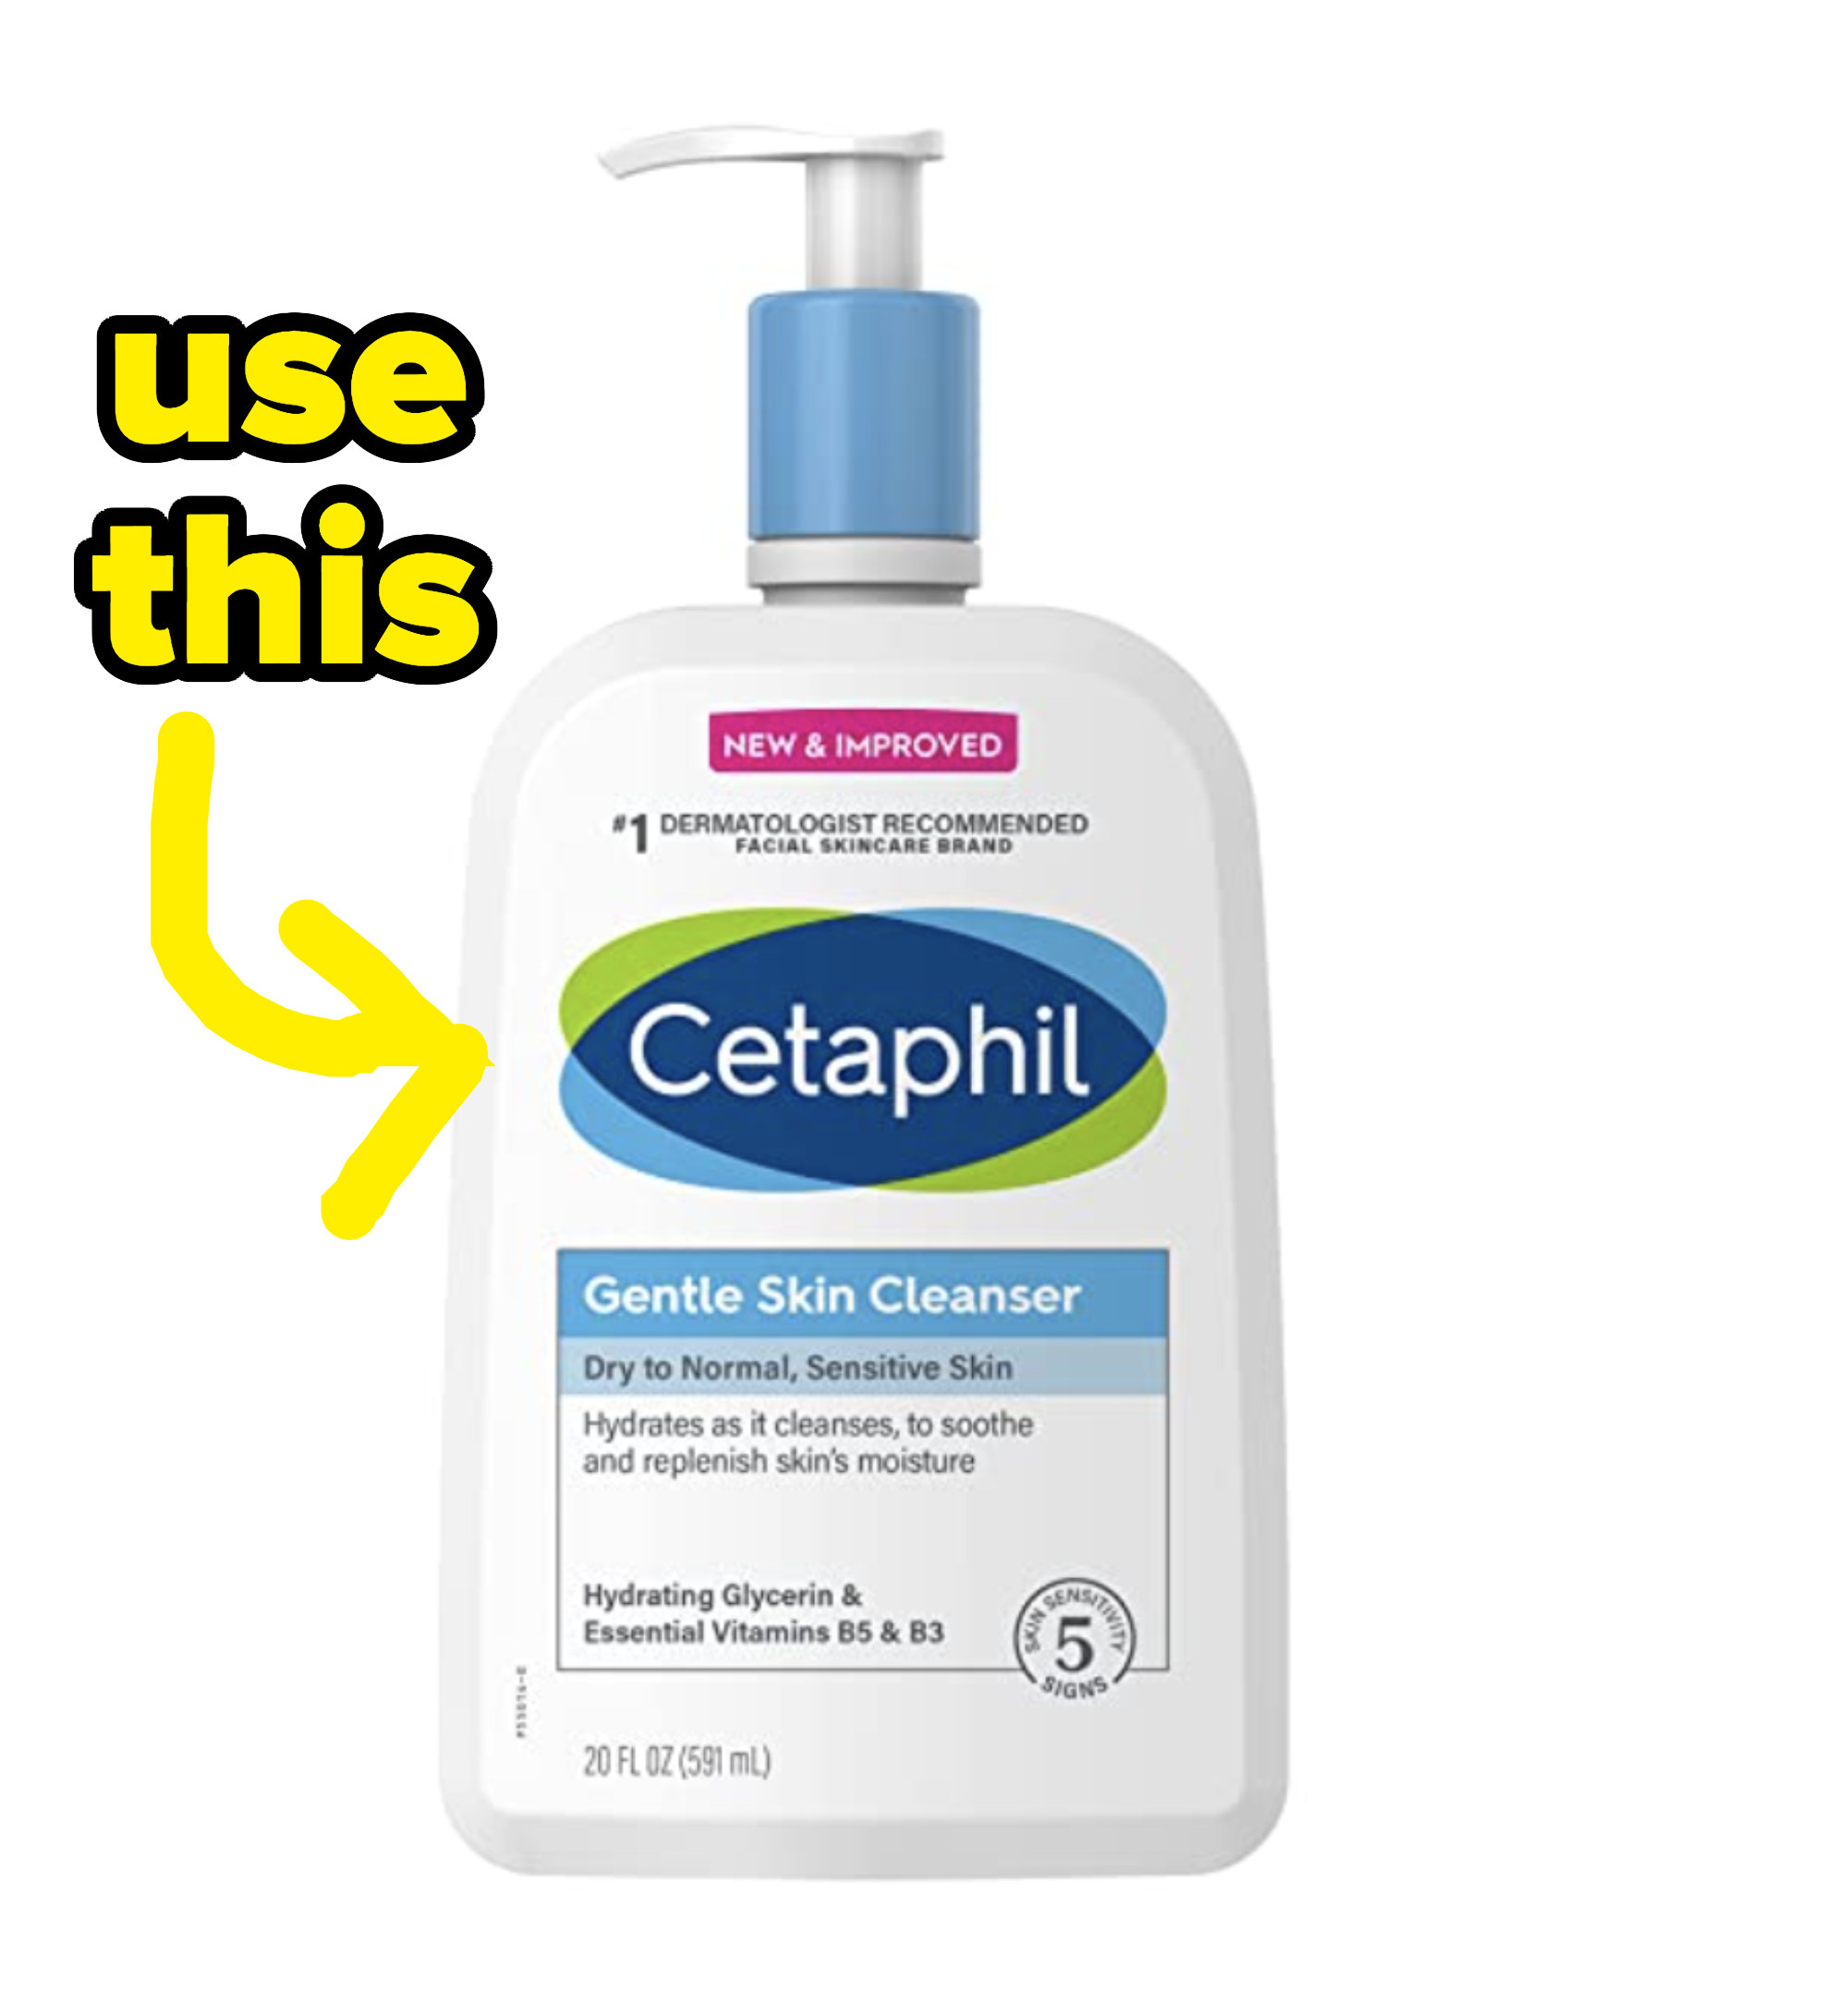 cetaphil cleanser labeled &quot;use this&quot;